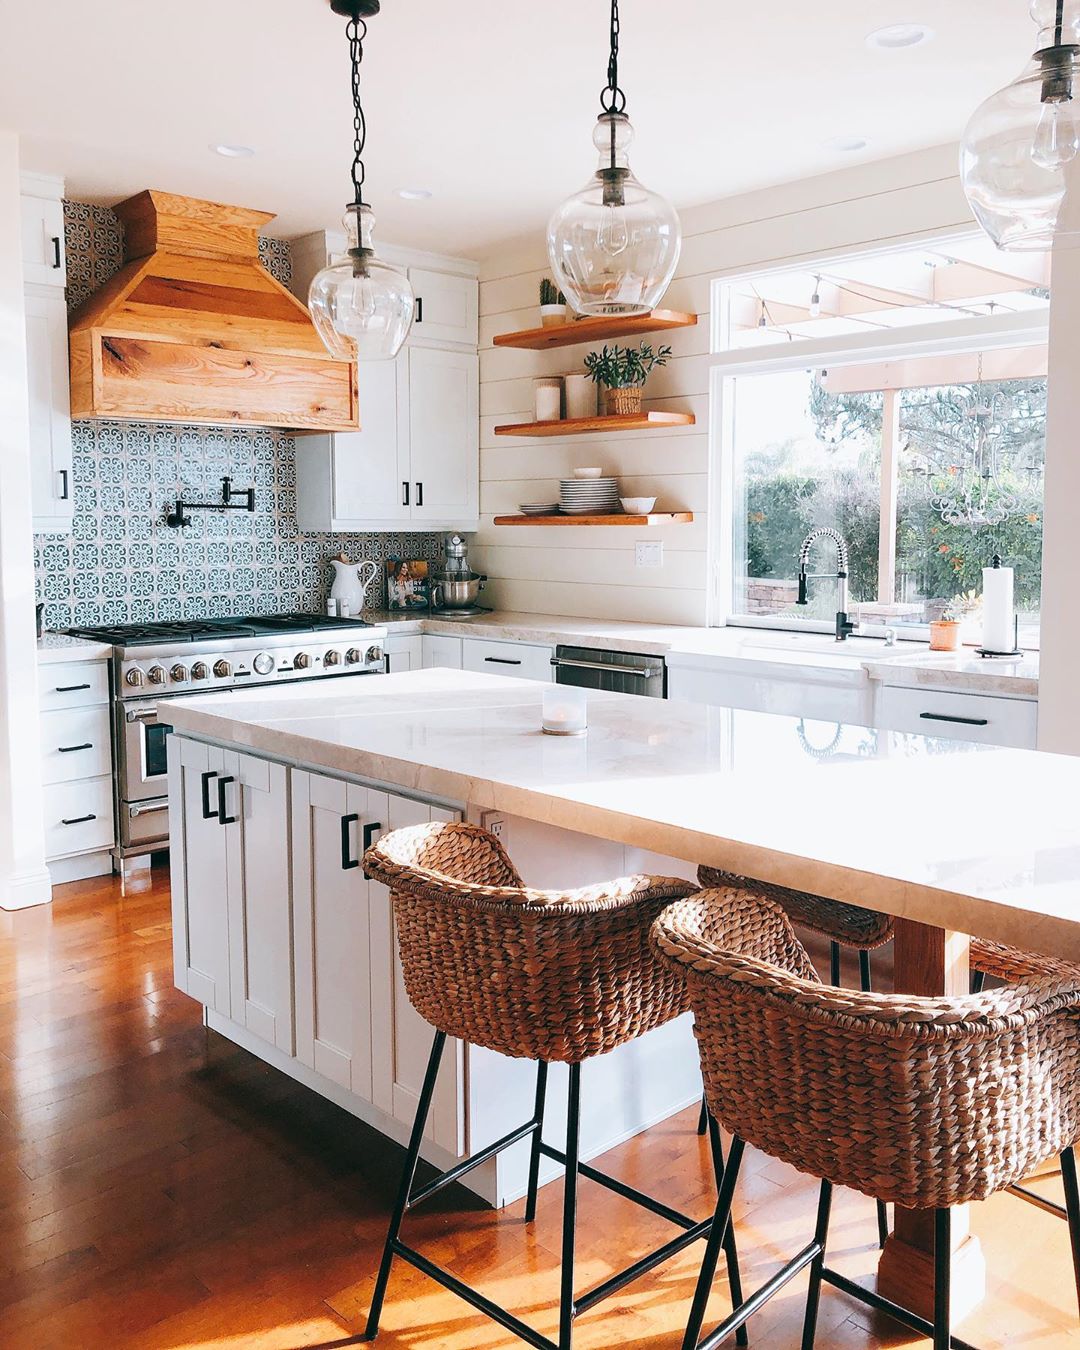 Modern kitchen. Photo by Instagram user @theressnowplacelikehome